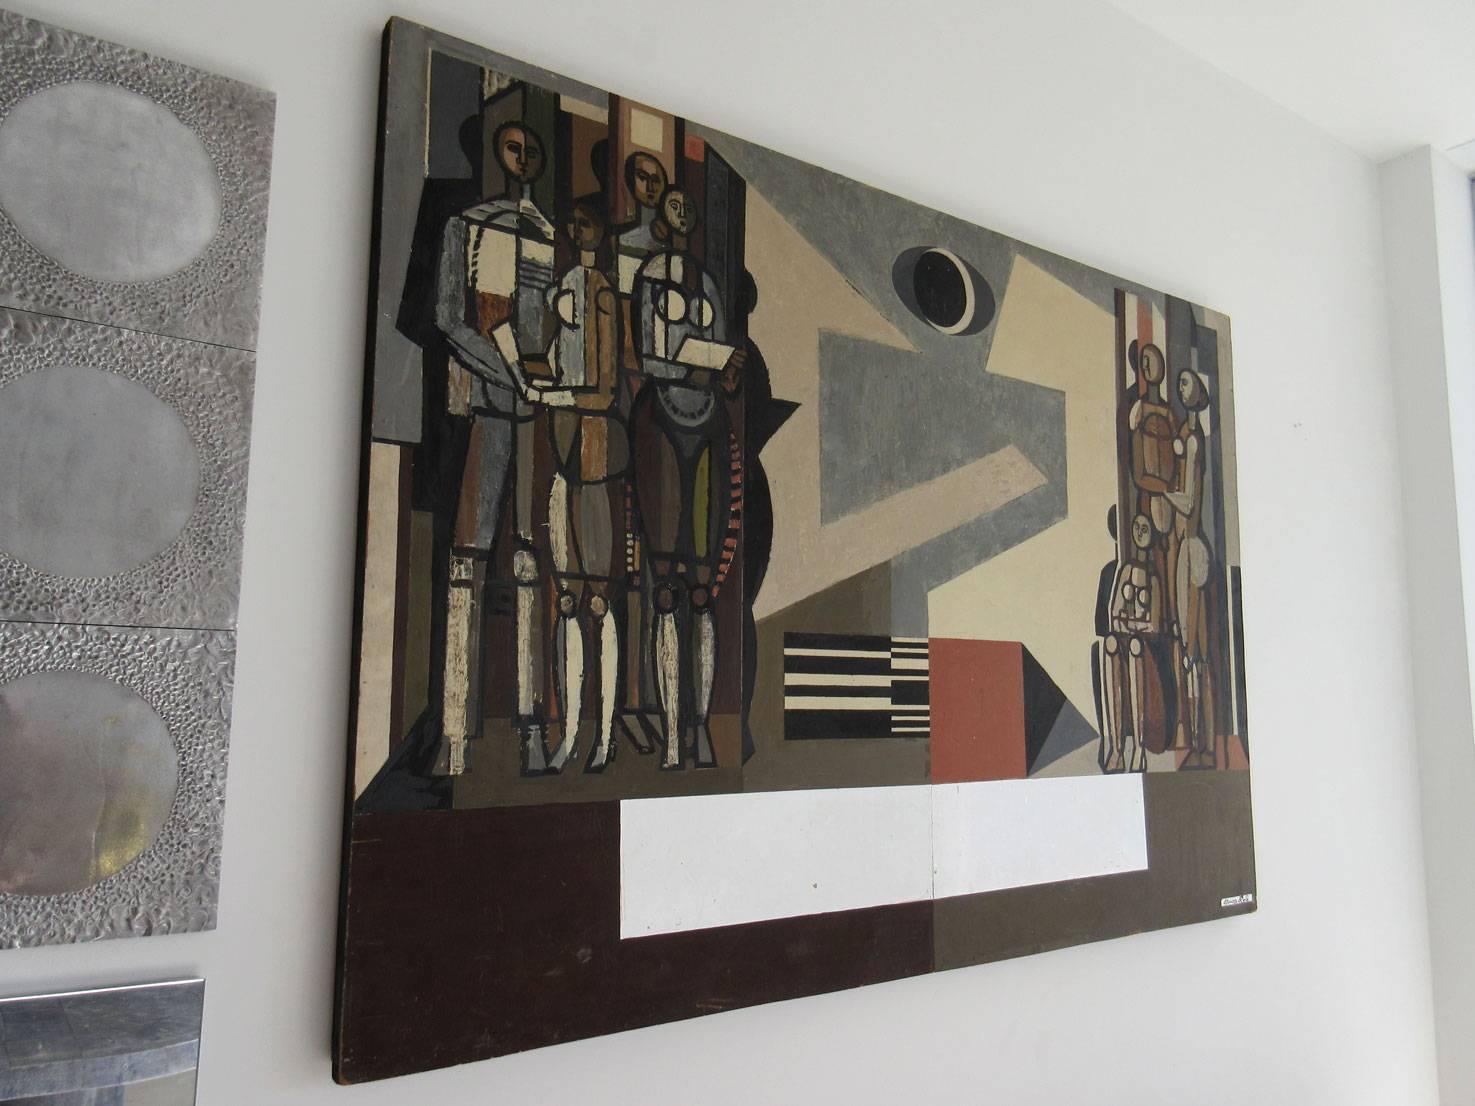 Mid-Century Modern oil painting on wood by Hungarian Artist Bencze Laszlo.
Entitled Mozaik 46 H x 66 W. Large-scale modernist image of stylized geometric people in an abstract constructivist landscape.